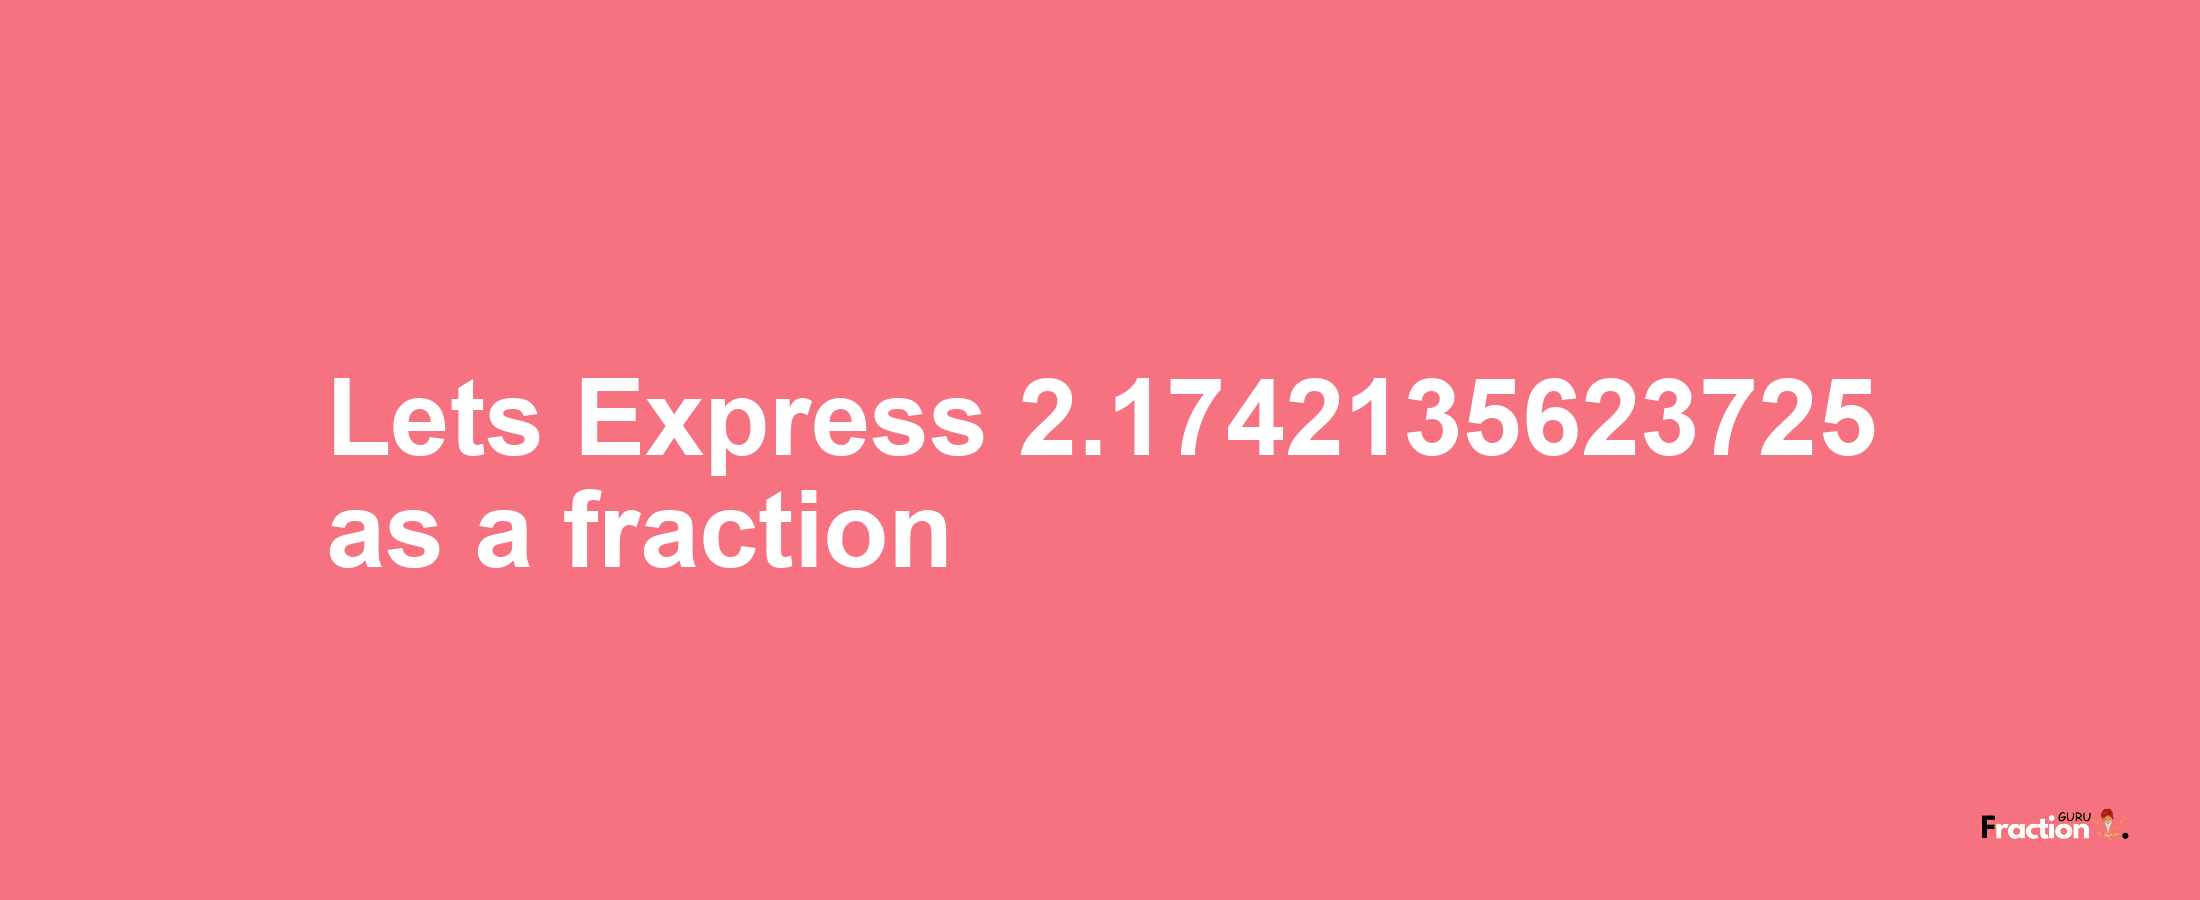 Lets Express 2.1742135623725 as afraction